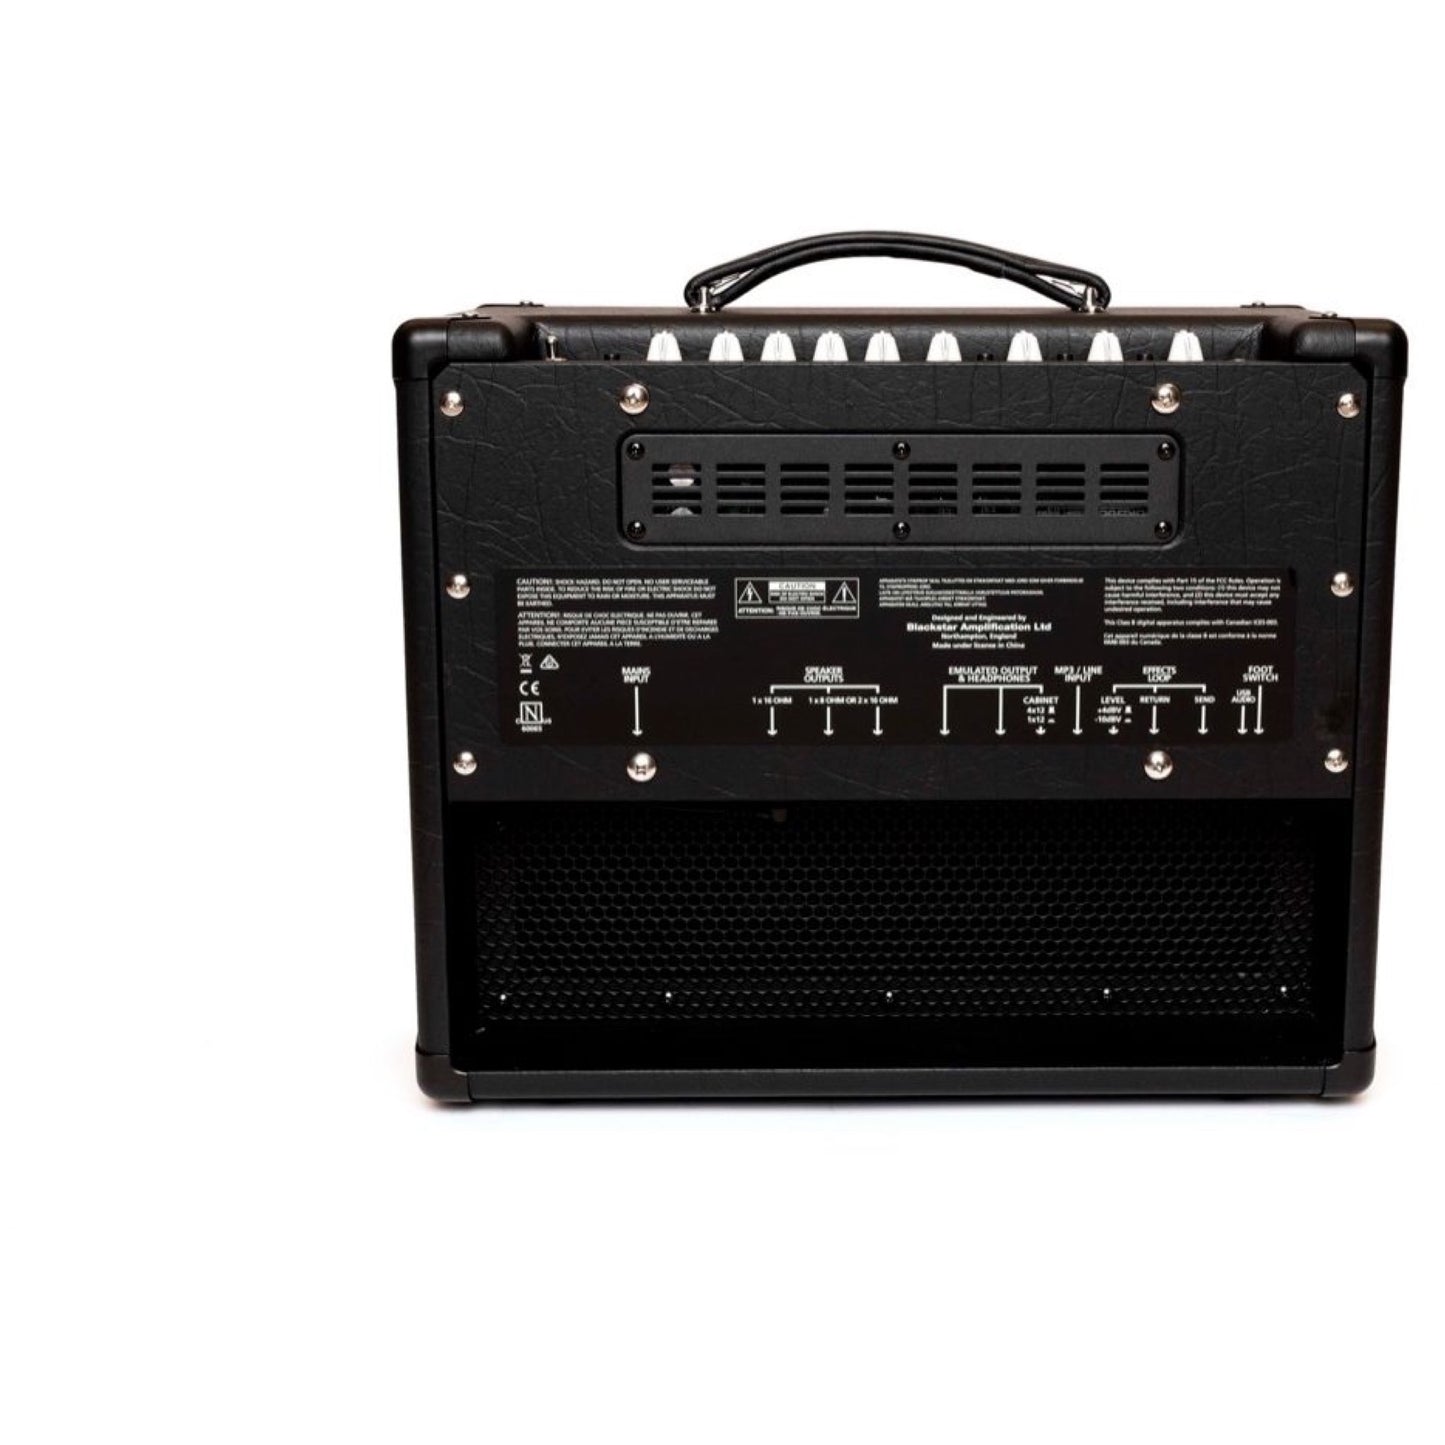 Blackstar HT5R MkII Guitar Combo Amplifier with Reverb (5 Watts, 1x12 Inch)